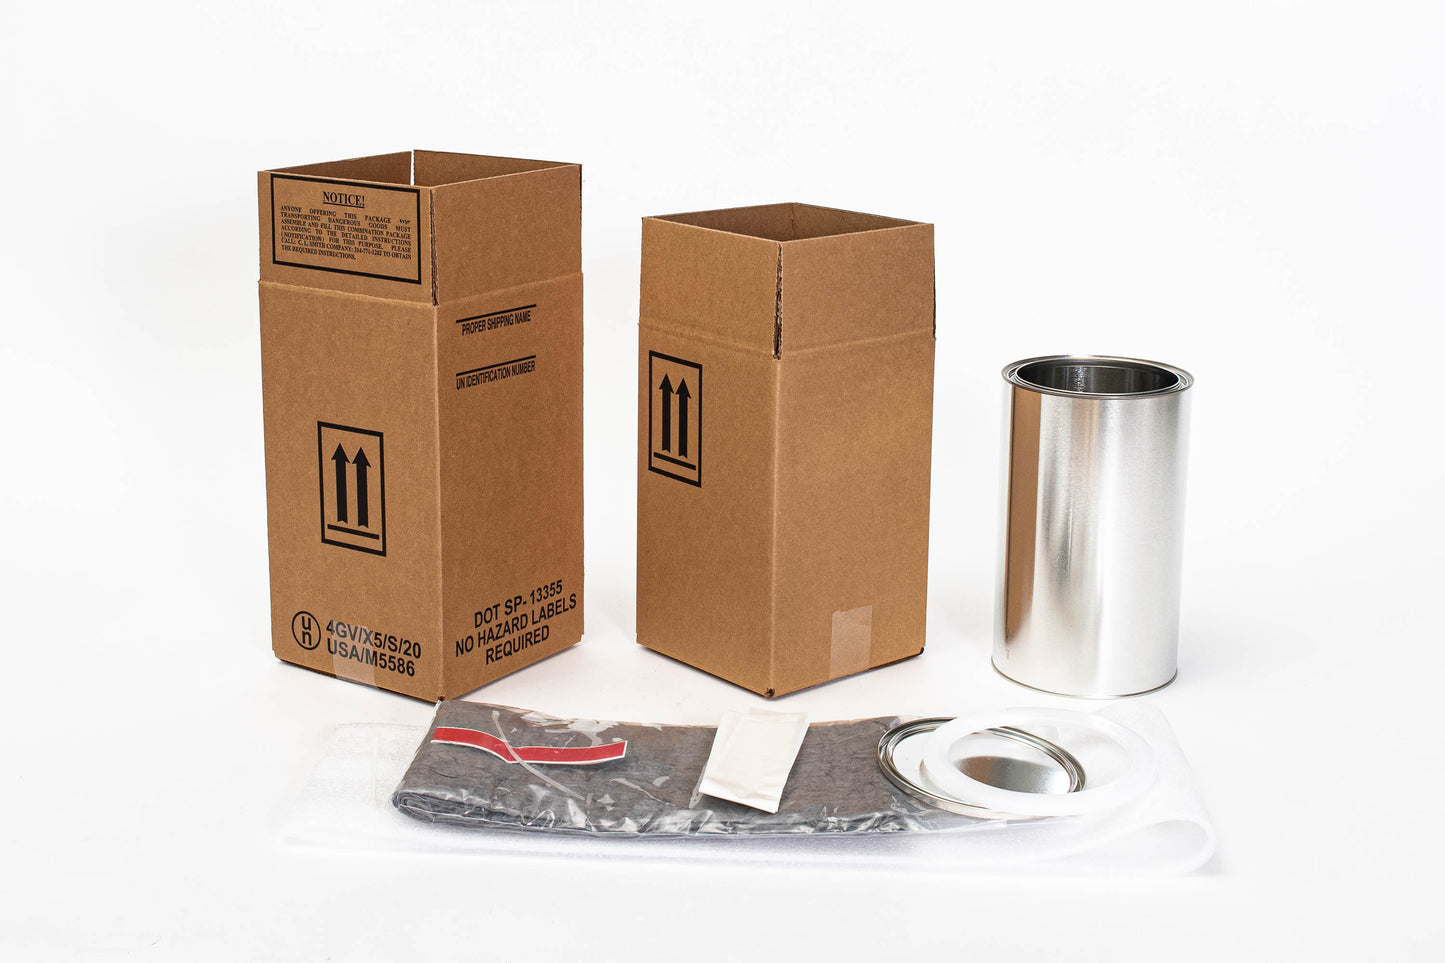 UN4GV 1-in 1 Liter/32 oz (or less) Special Permit Packaging Kit